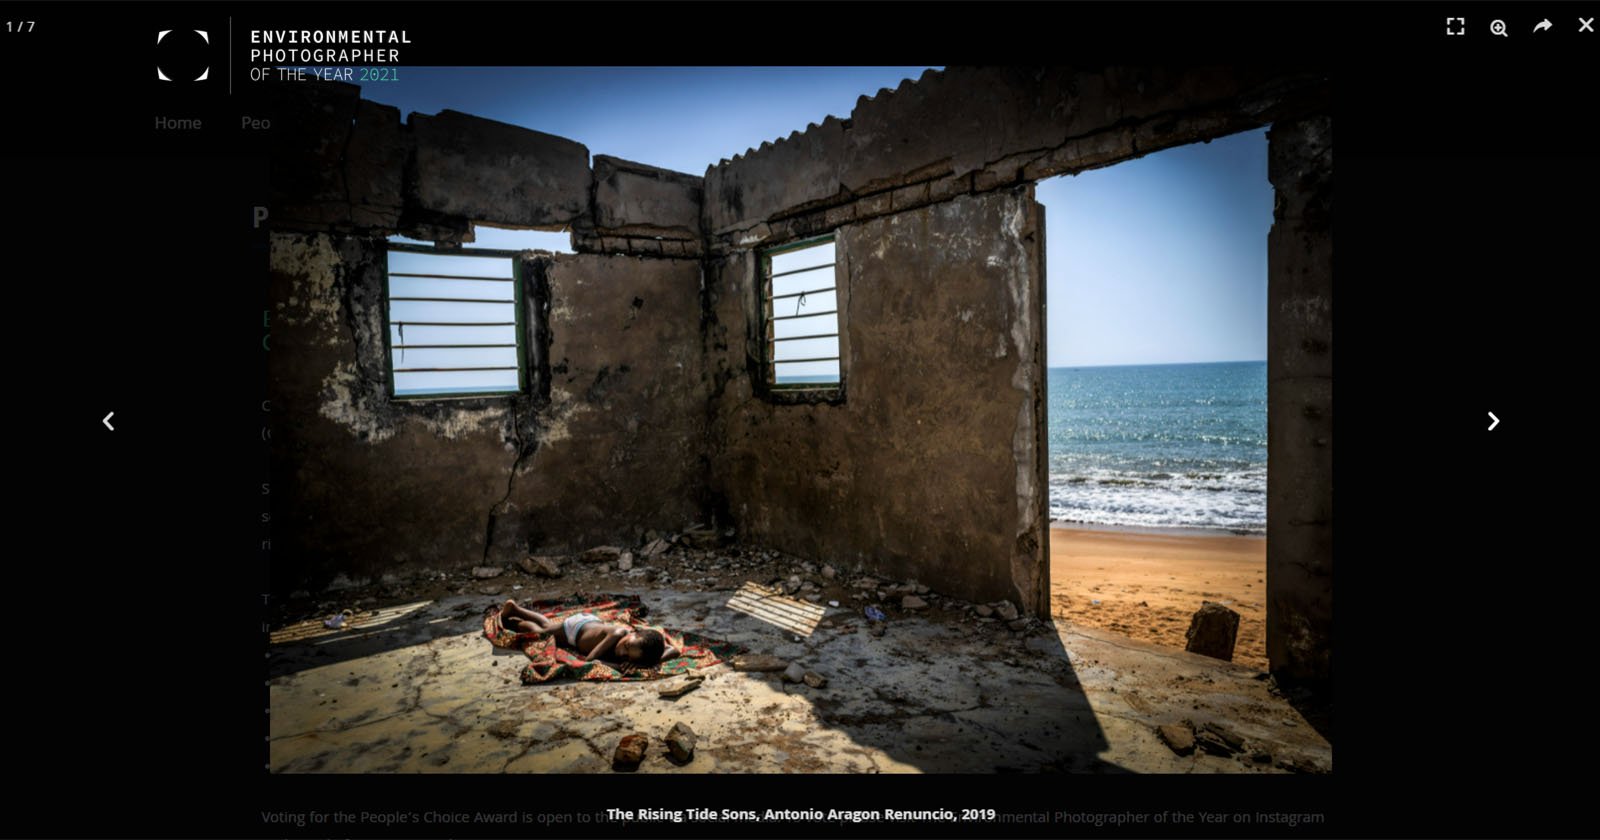 A photo contest-winning image showing a boy sleeping in an abandoned building on a beach